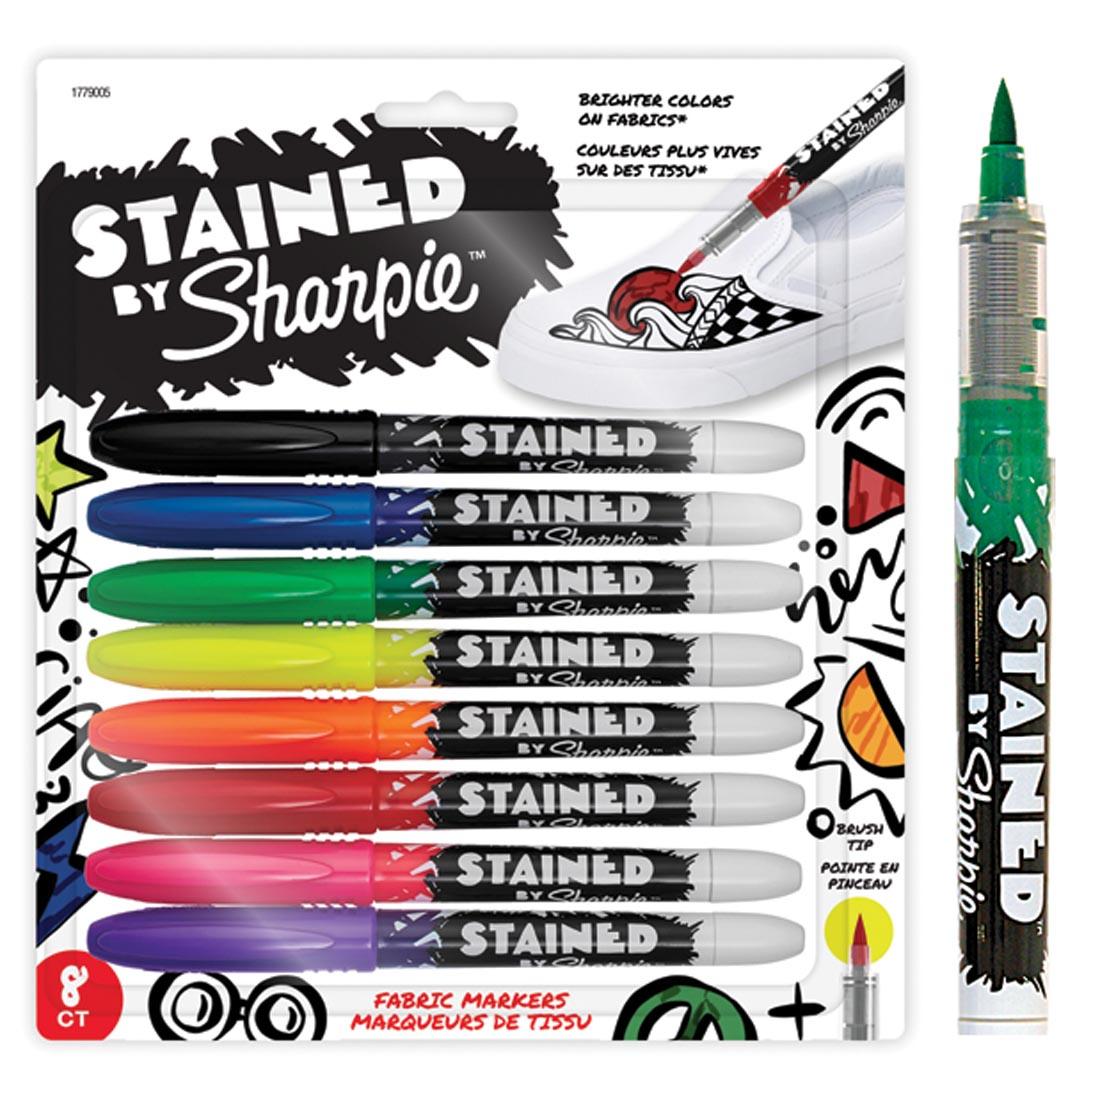 Stained By Sharpie Brush Tip Fabric Markers, with one marker outside the package